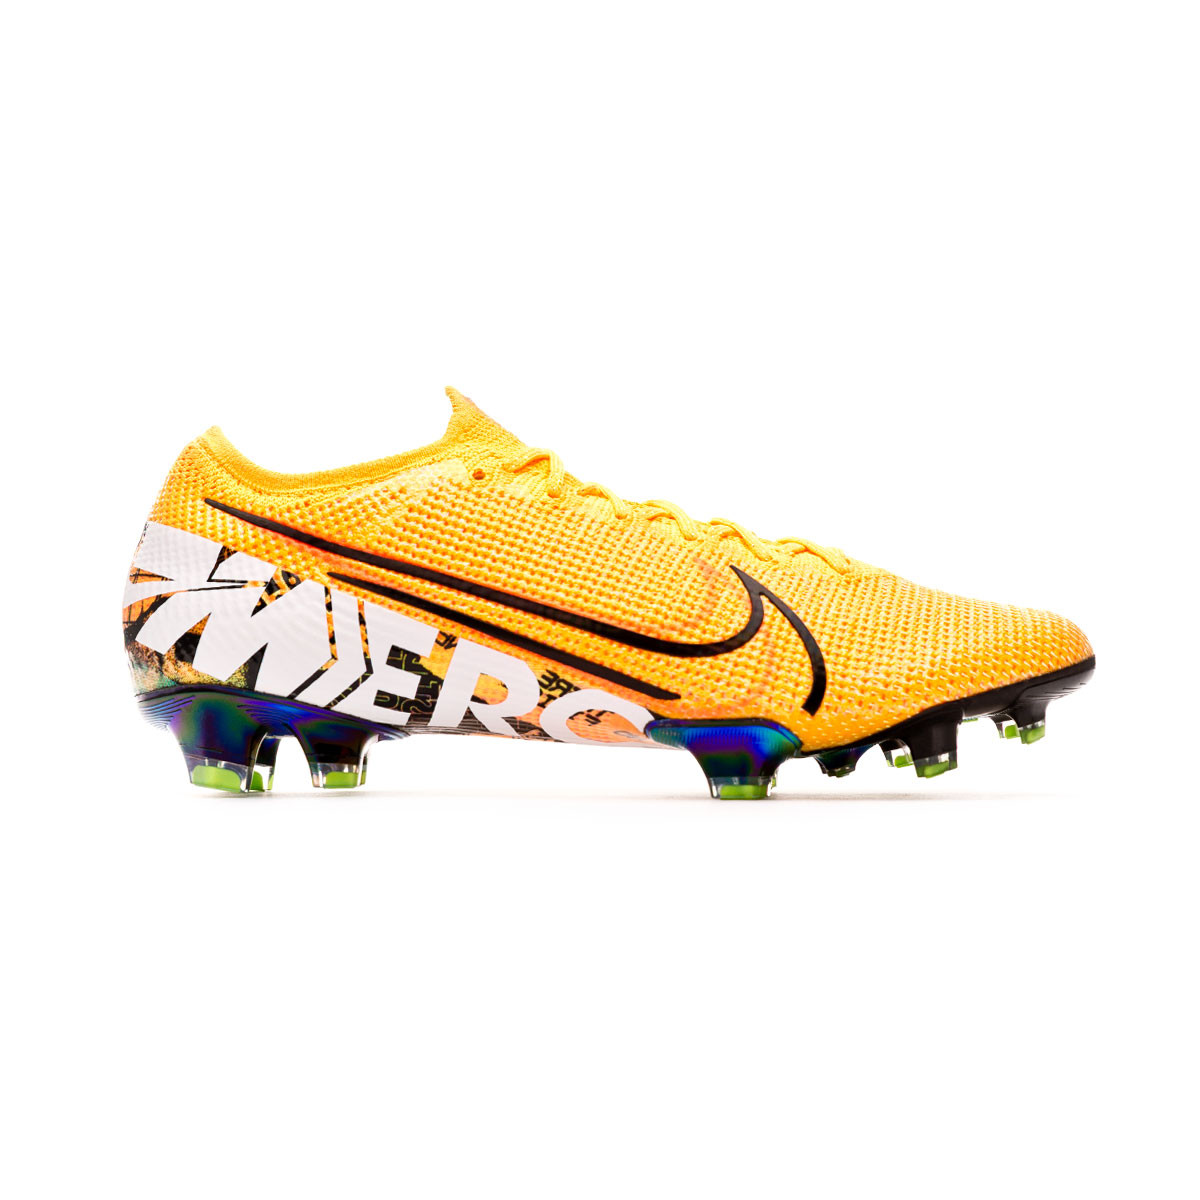 Best Nike Mercurial Soccer Cleats Best Price Guarantee at